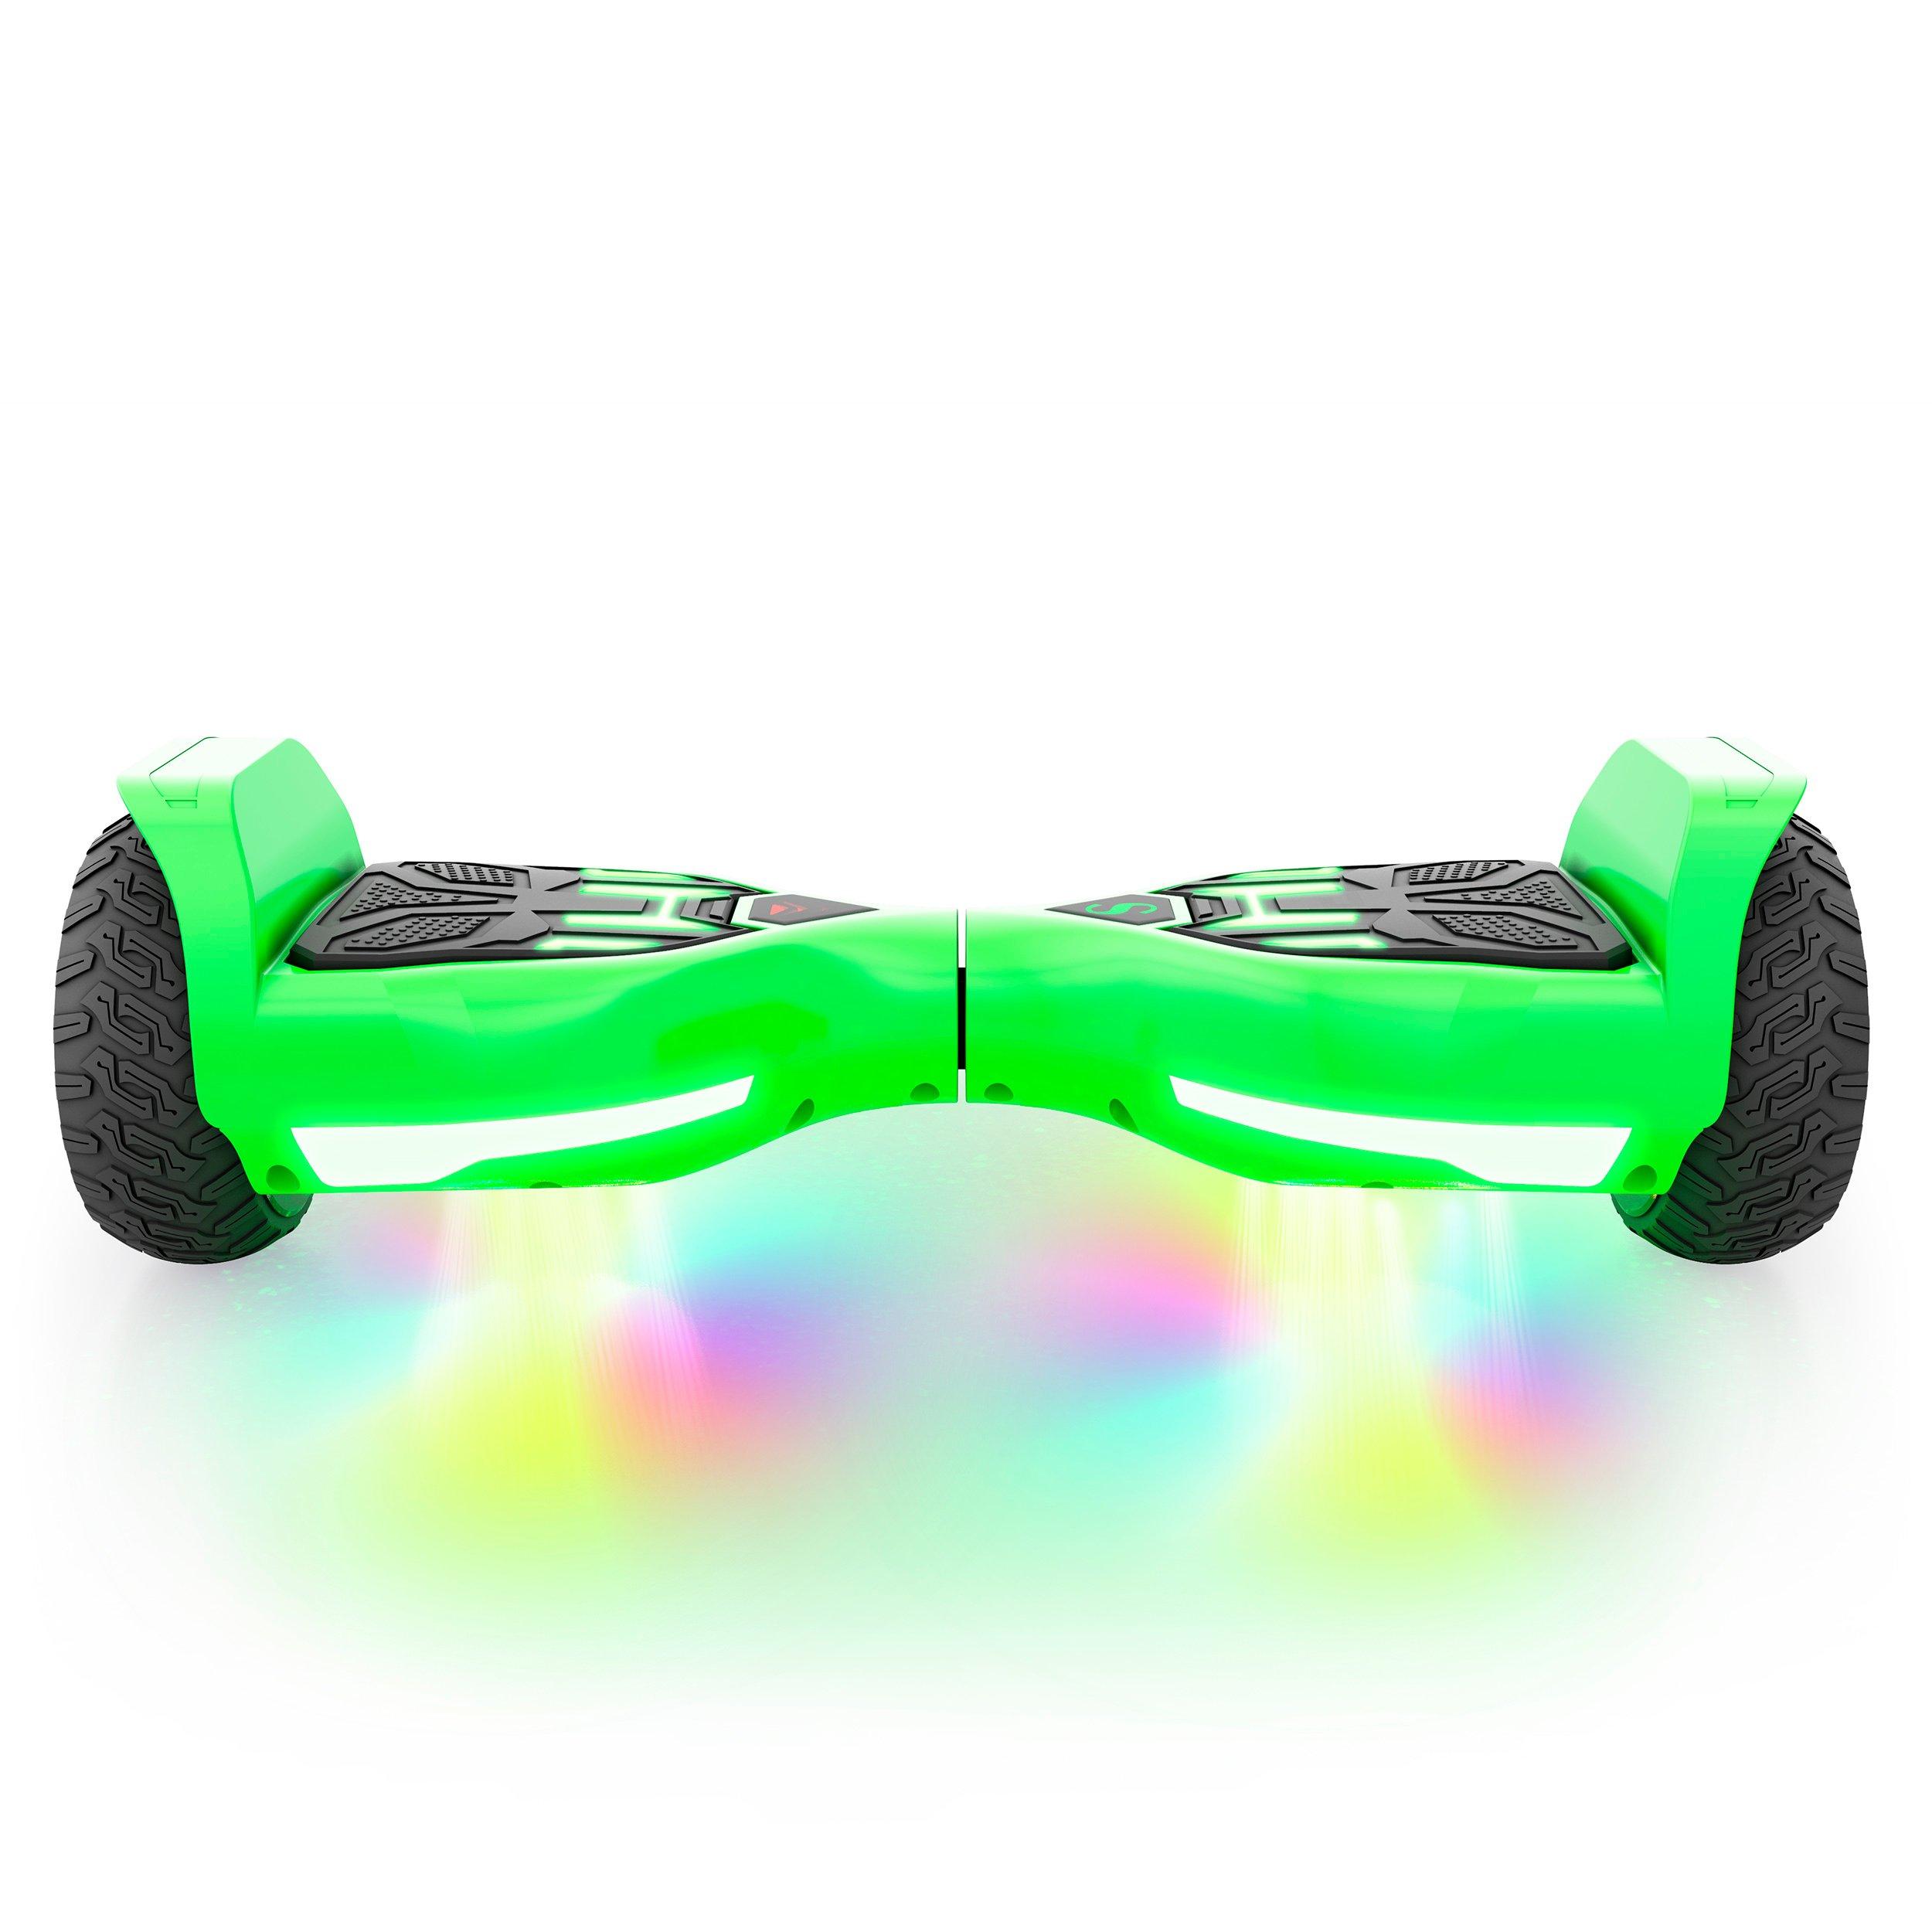 list item 6 of 9 swagBOARD Warrior T580 Hoverboard with MusicSynced Light-Up LED Wheels